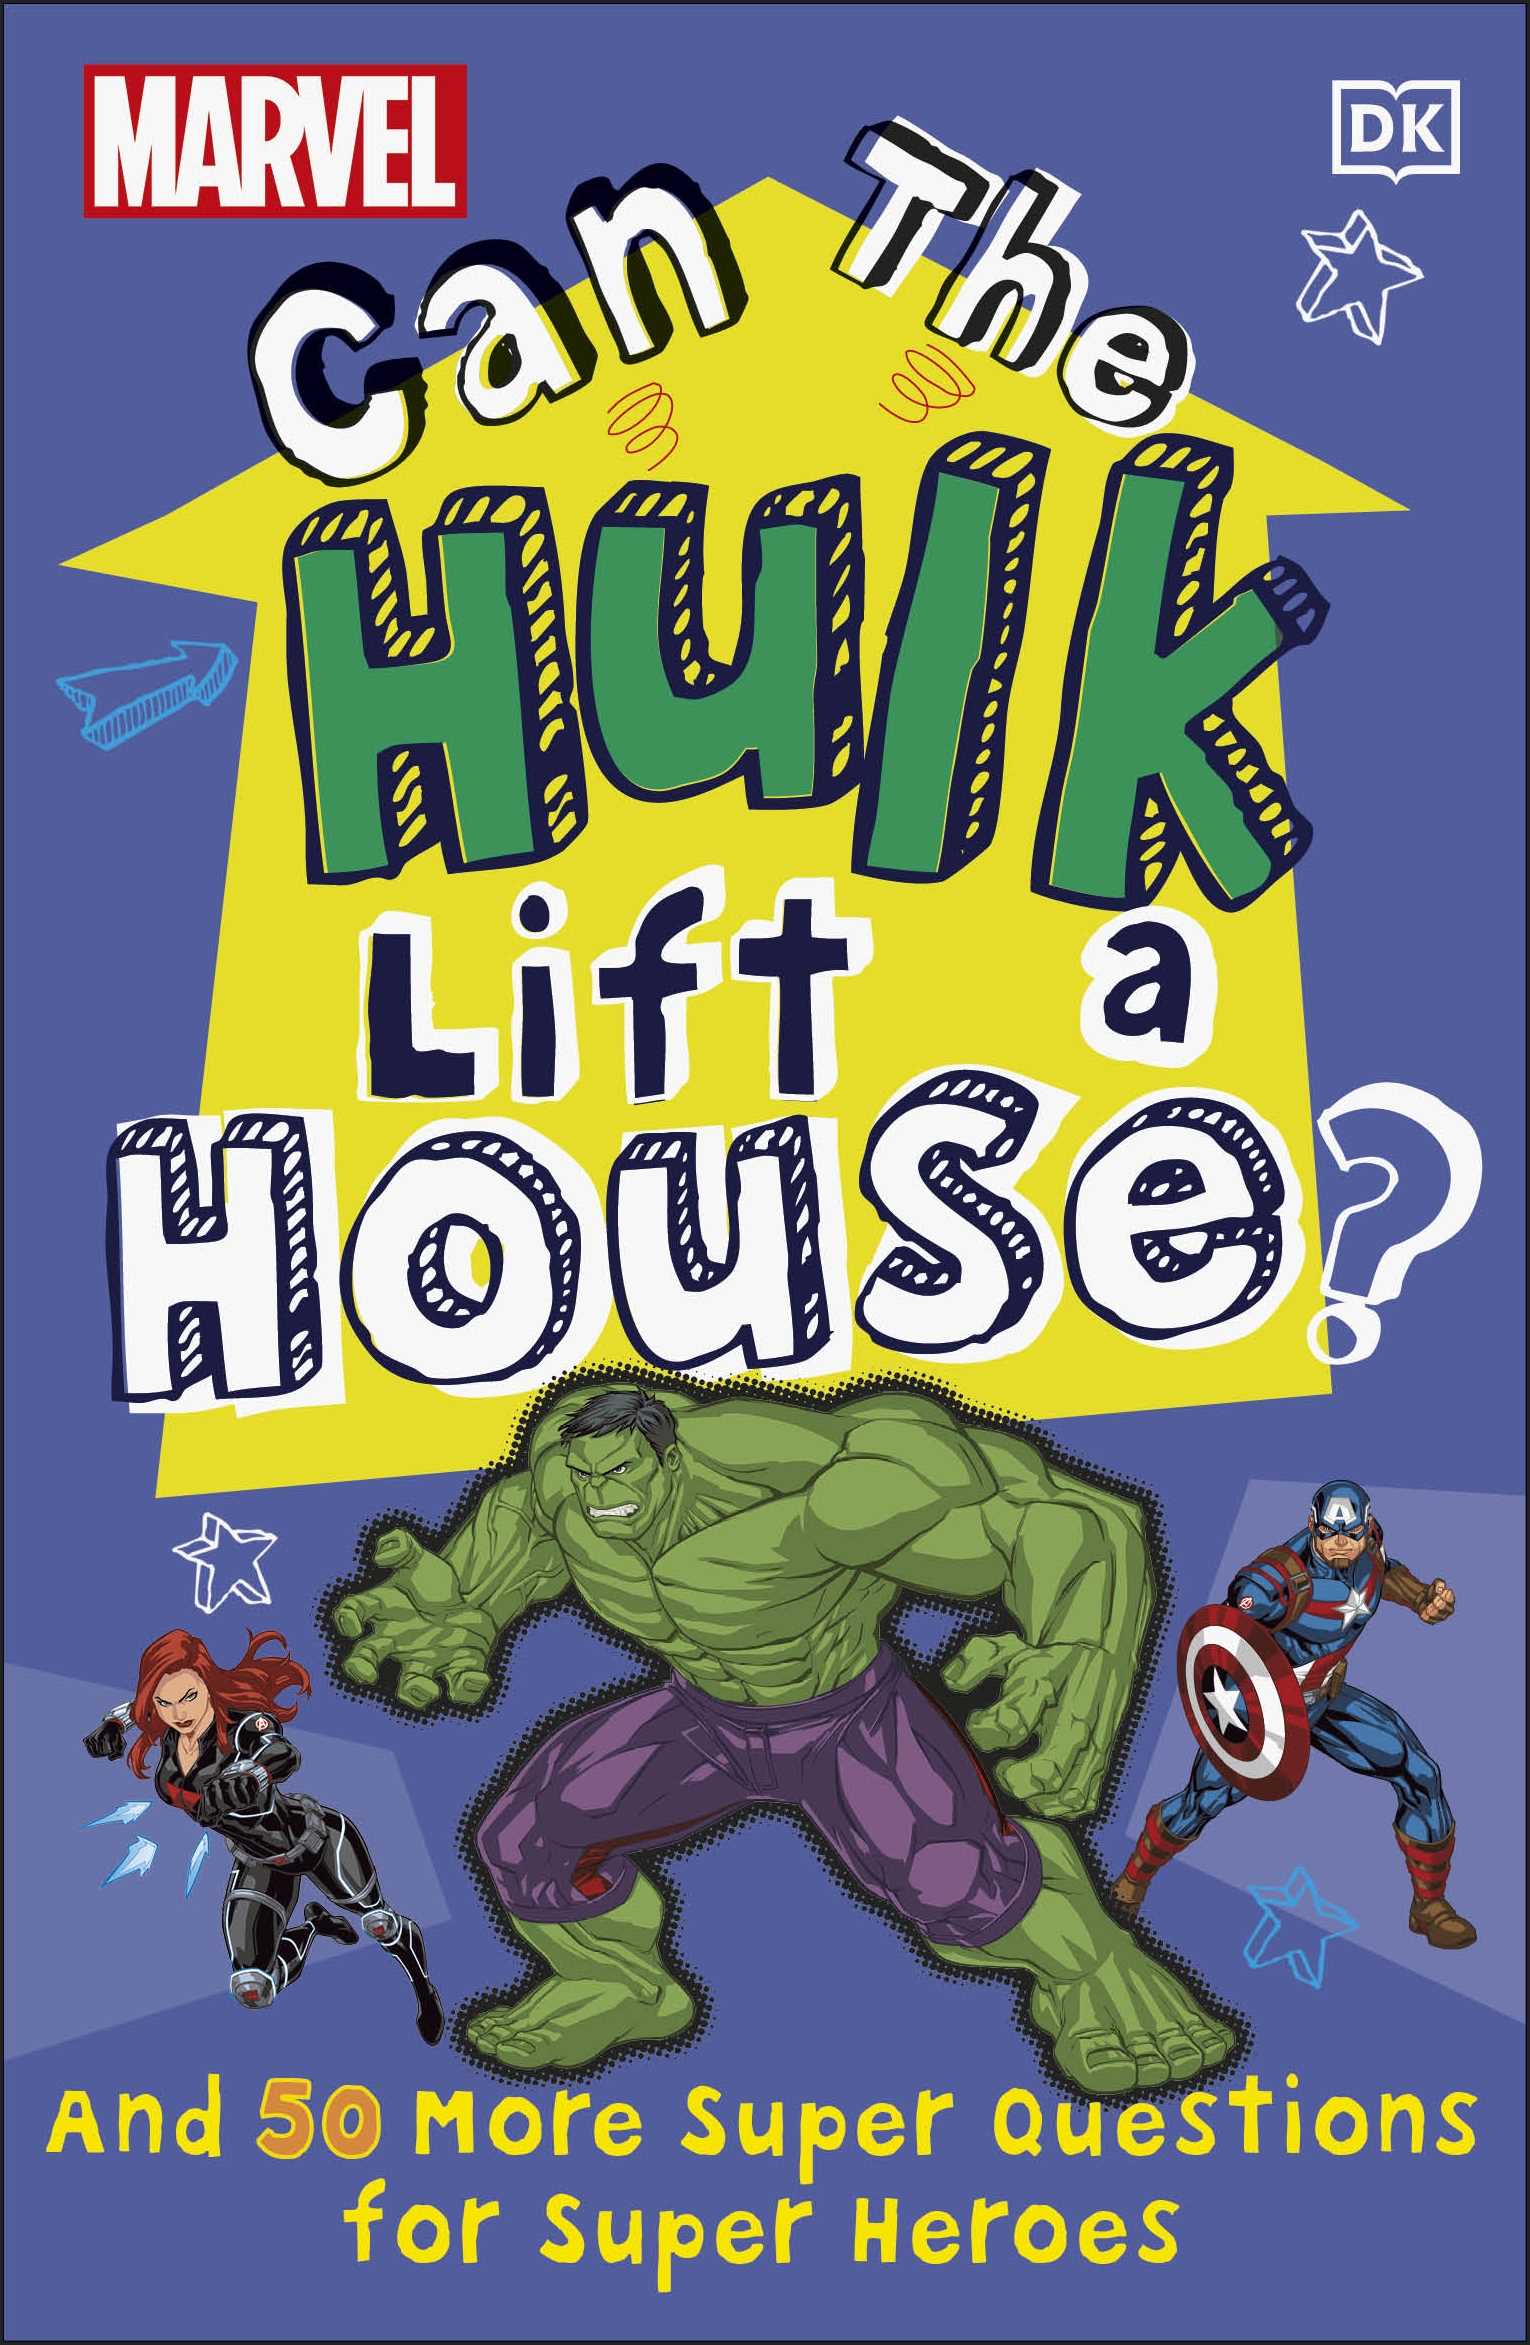 Can The Hulk Lift a House?